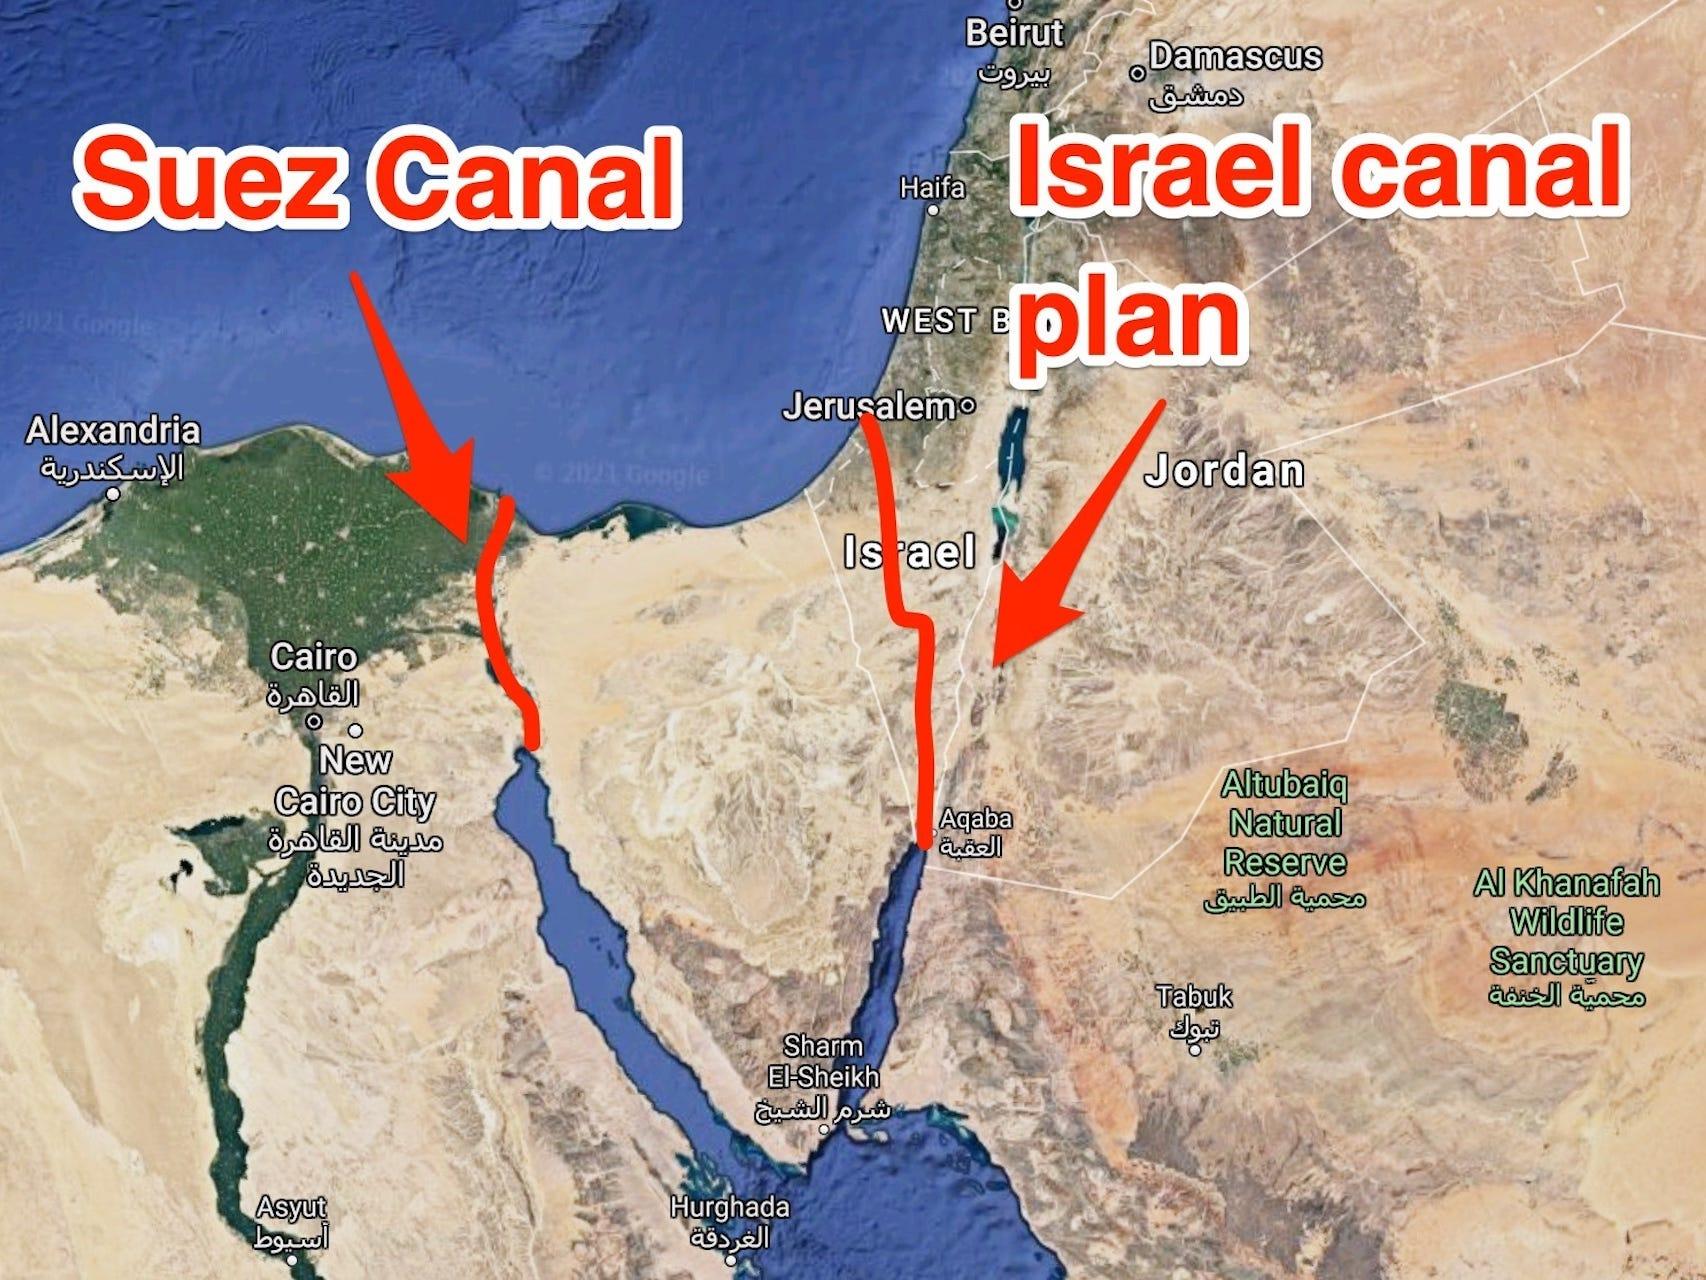 The US considered a proposal to use 520 nuclear bombs to carve out an alternative to the Suez Canal though Israel in the 1960s, according to a declass